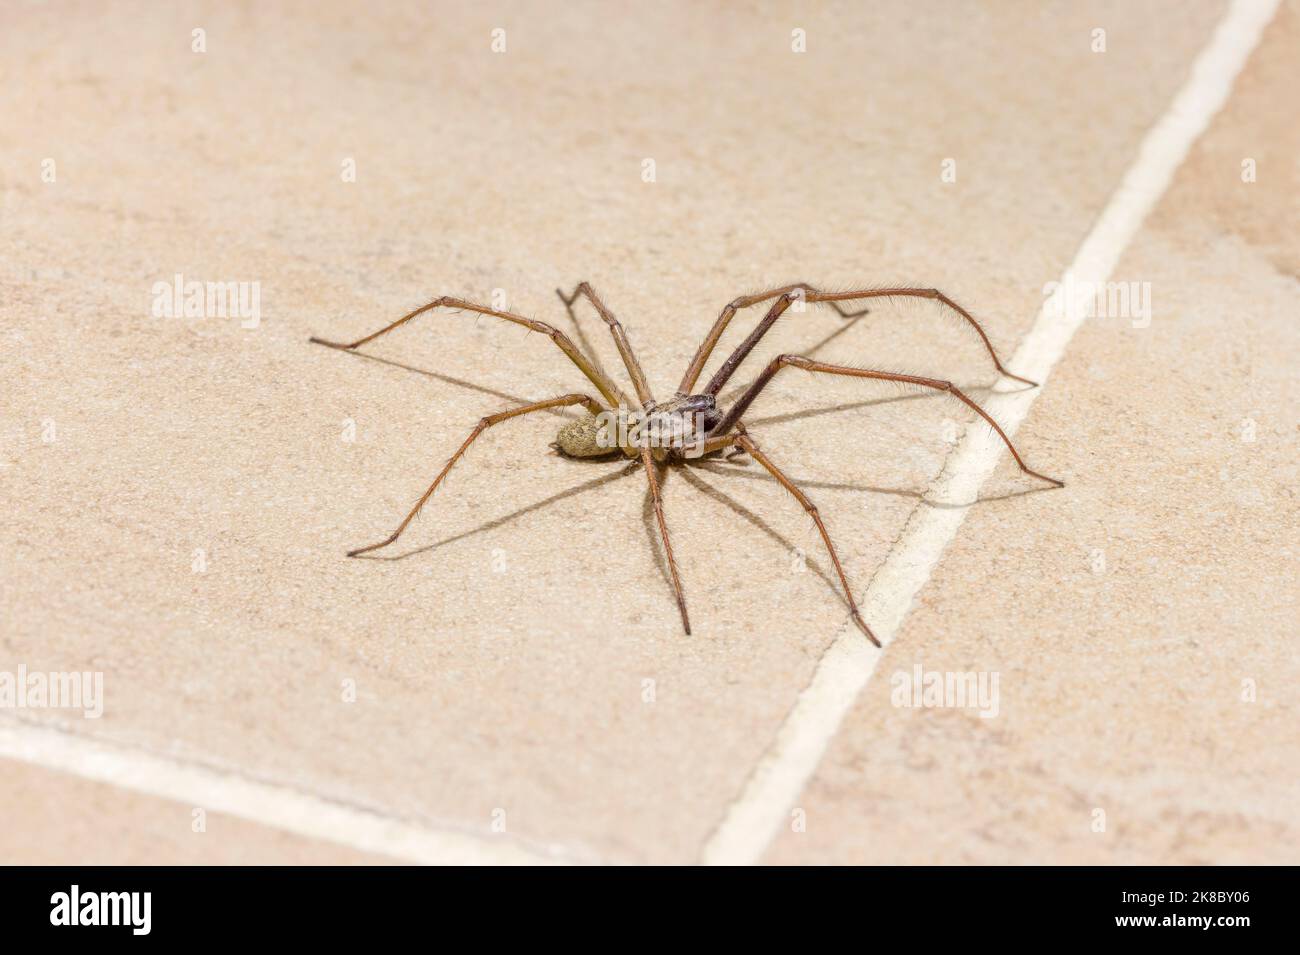 Giant house spider (Eratigena atrica) on a tiled kitchen floor in a UK house Stock Photo